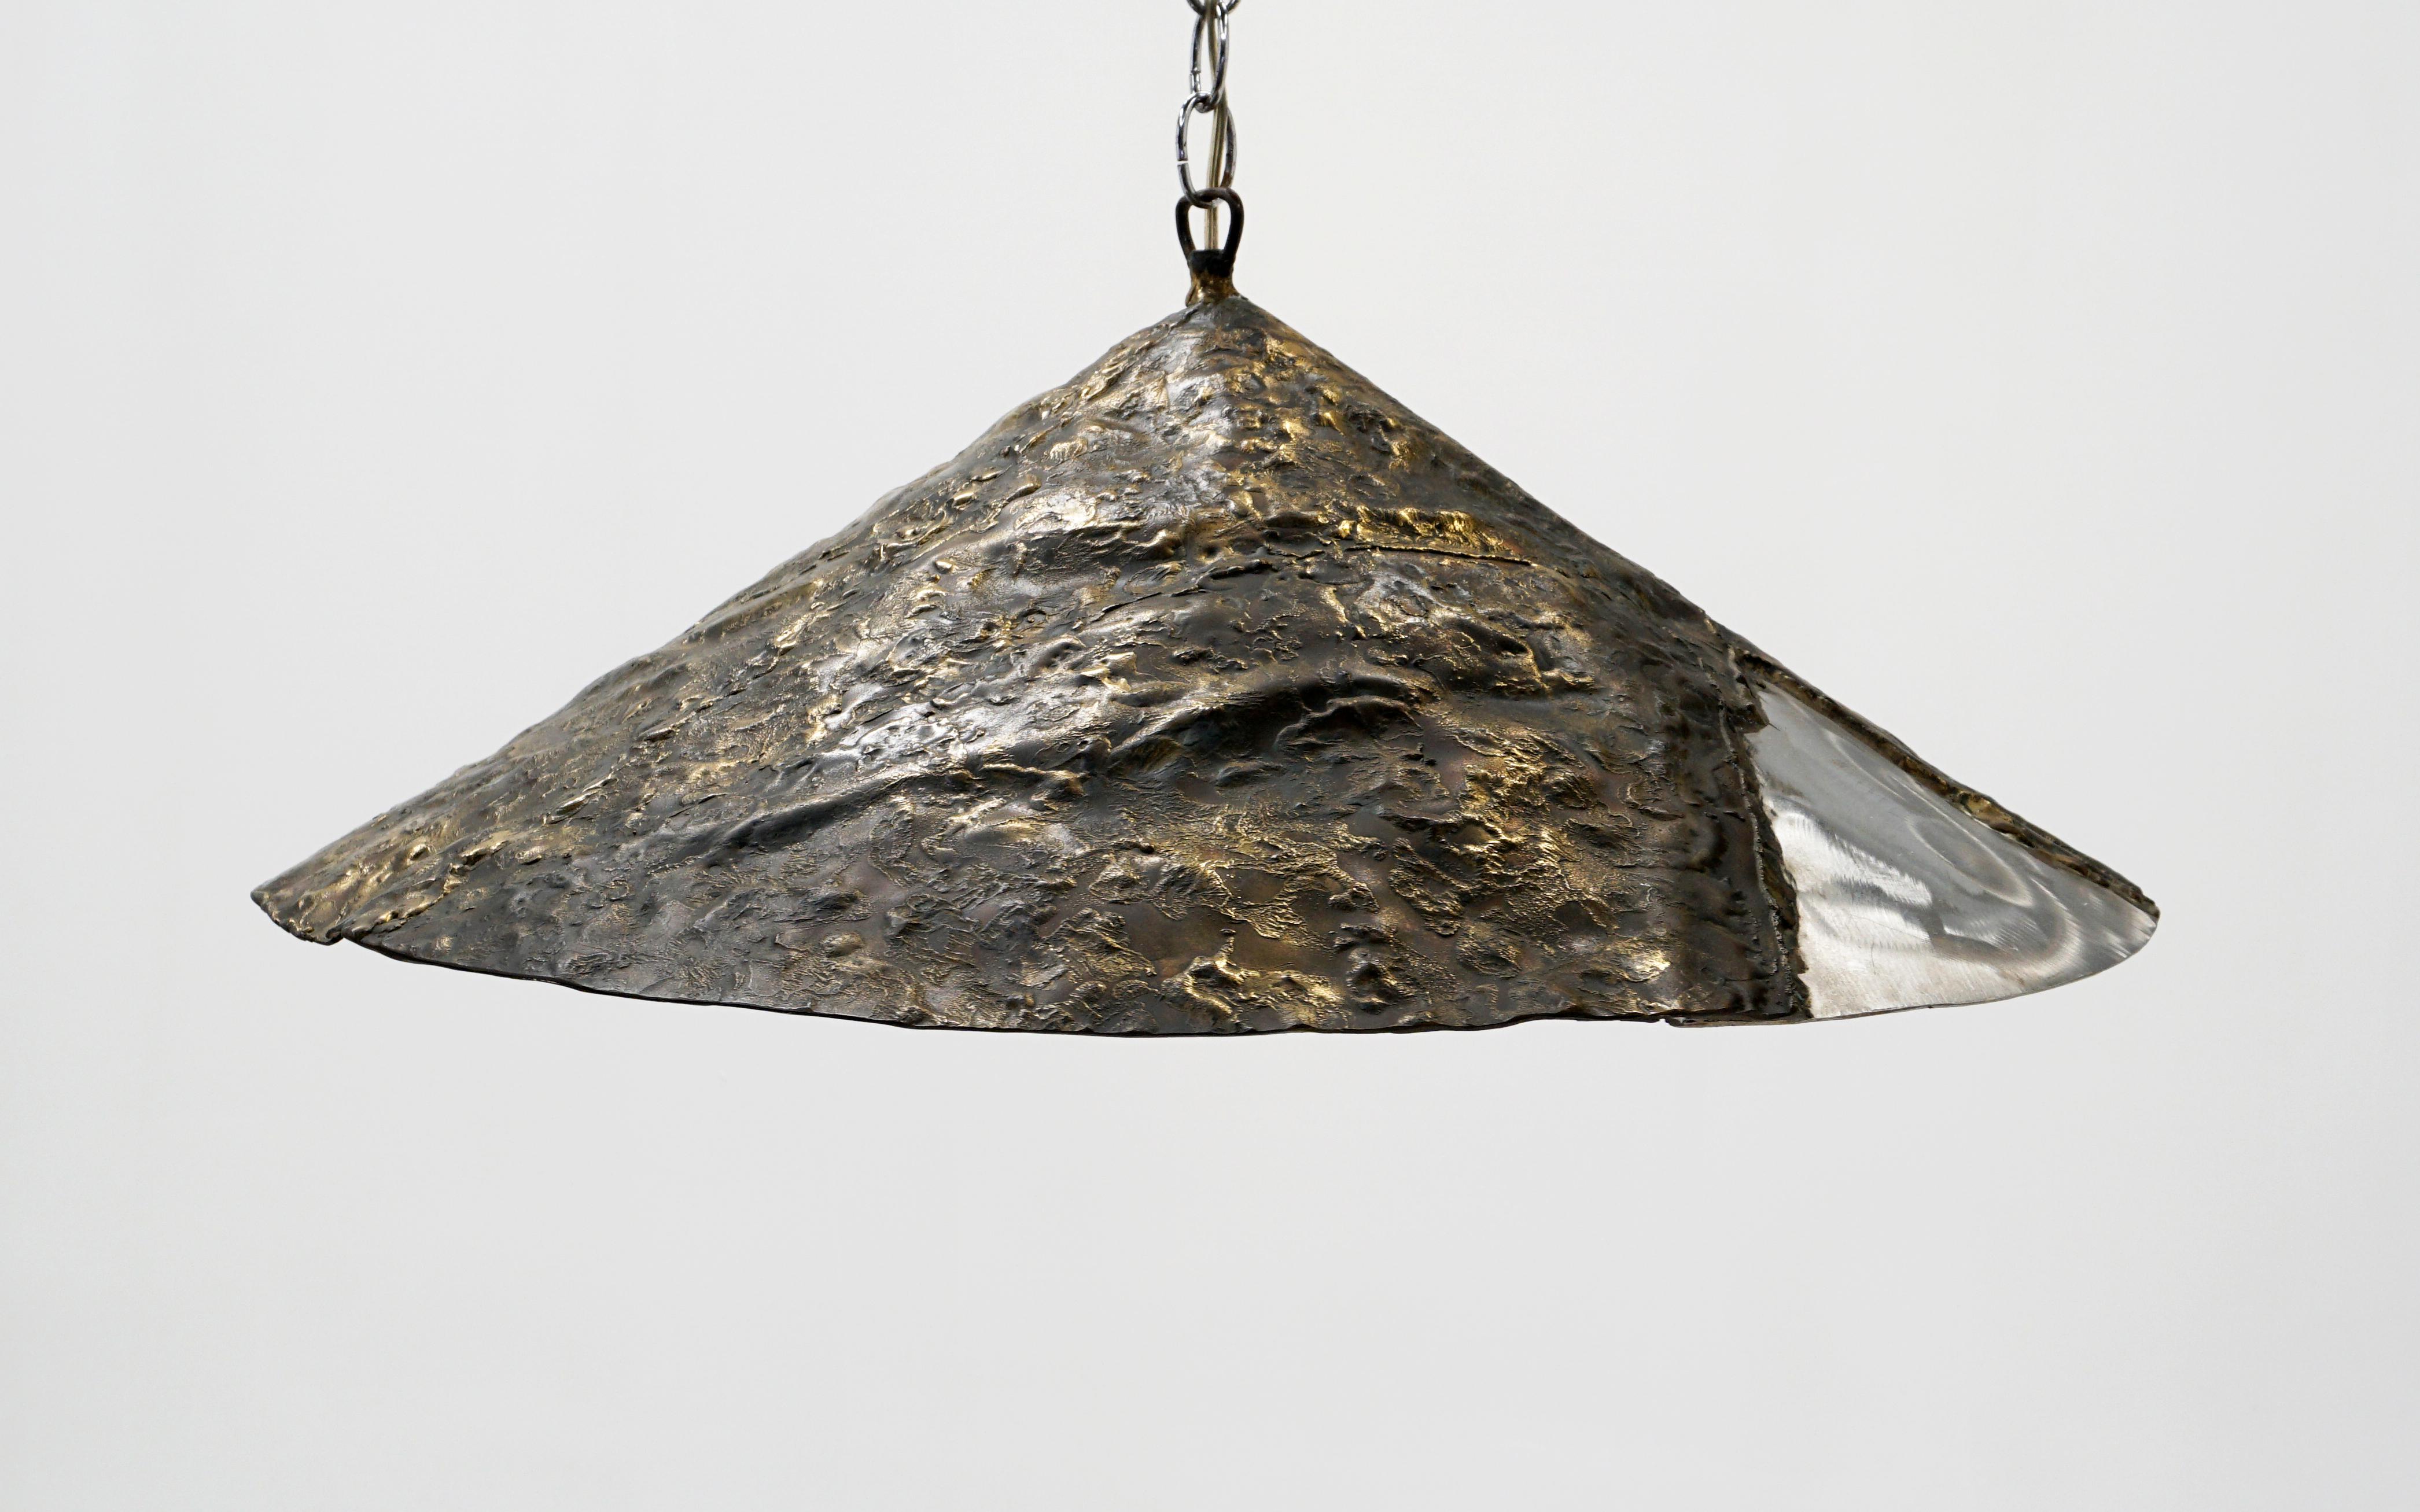 American Silas Seandel Pendant Light, Patinated Brass and Aluminum, Etched Signature For Sale